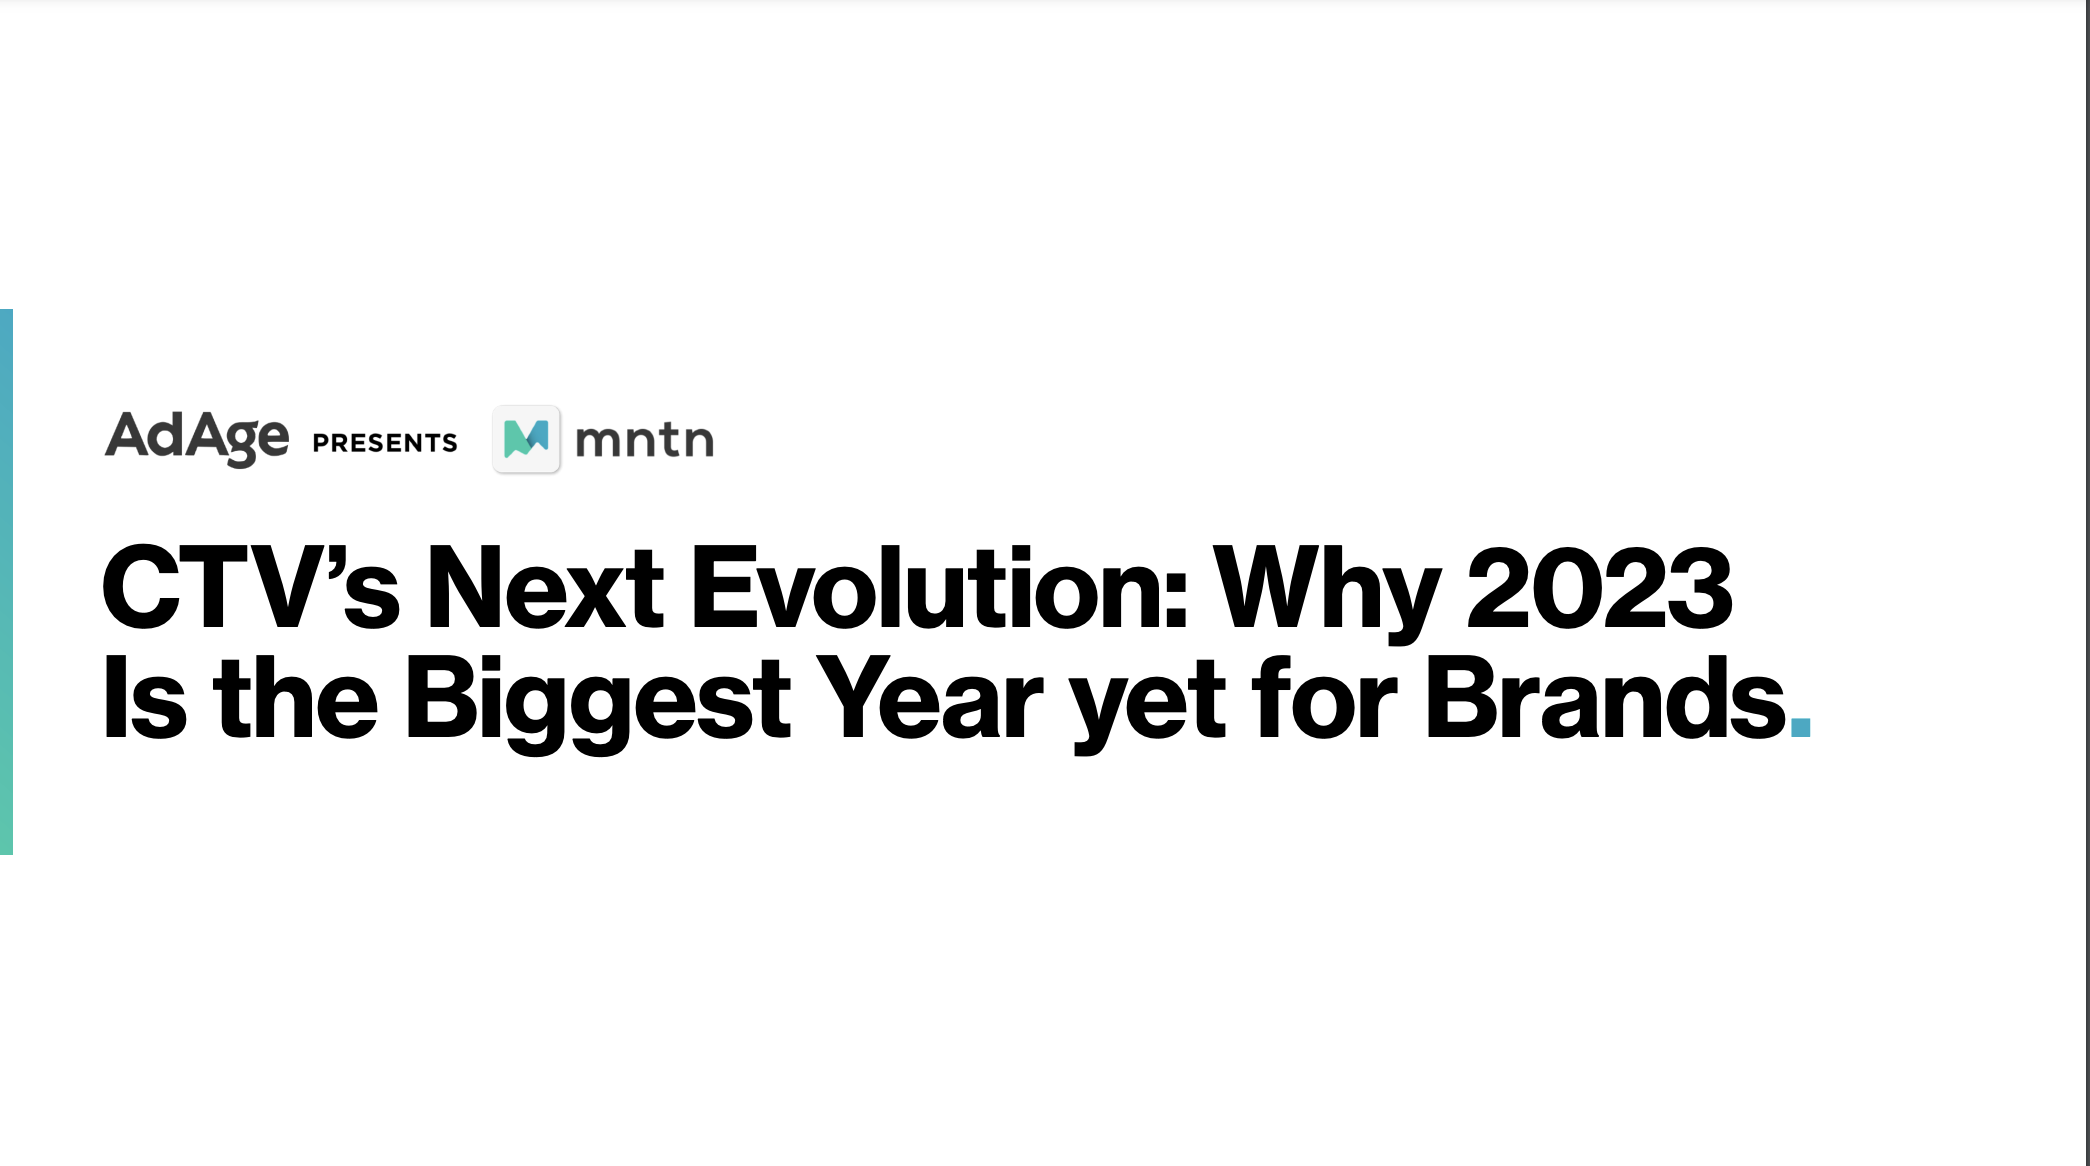 CTV’s Next Evolution: Why 2023 is the Biggest Year Yet for Brands